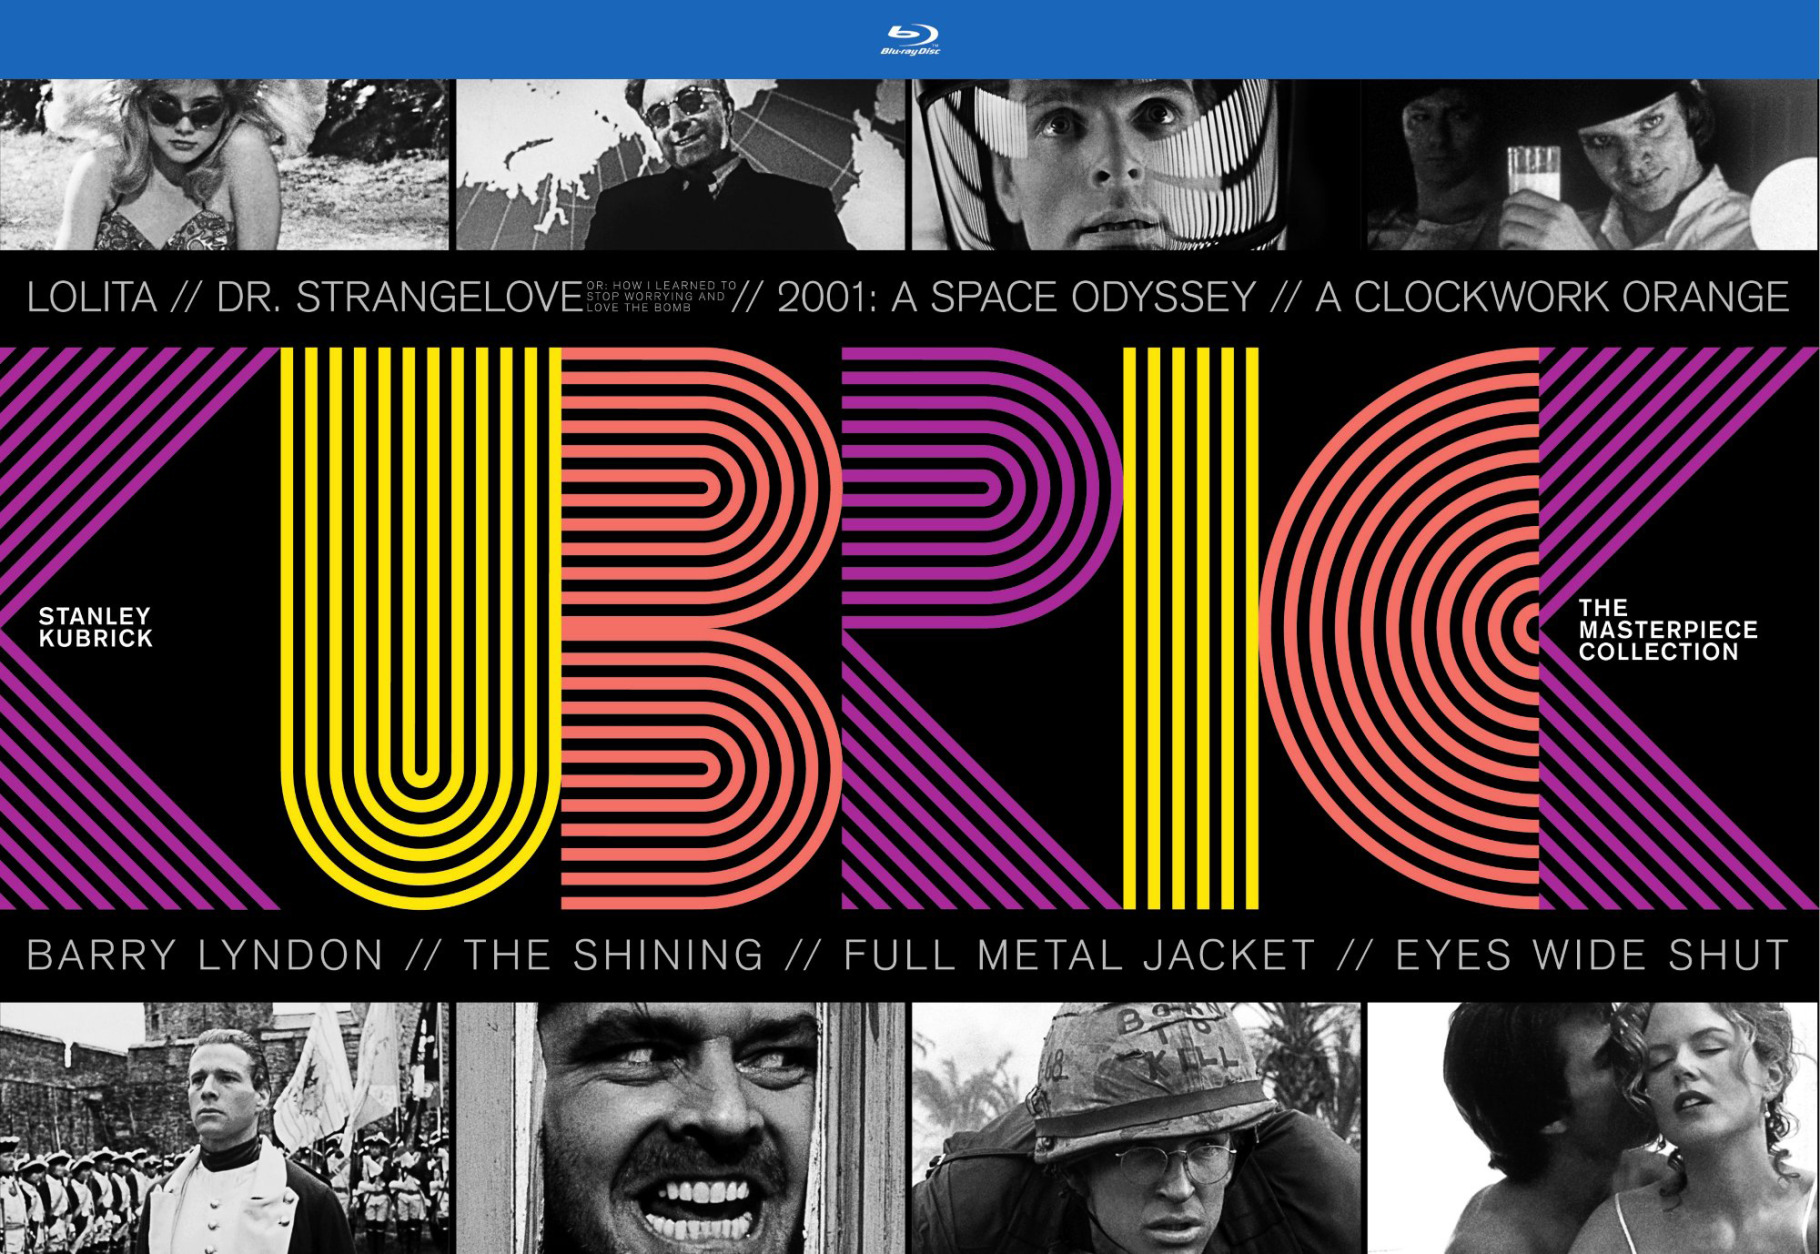 This photo proved by Warner Bros. Home Entertainment shows a box set, the 10-disc "Stanley Kubrick: The Masterpiece Collection." It includes a hardcover book of film archive photos, two new documentaries about Kubrick, and eight of his films: "Lolita," "Dr. Strangelove," "2001: A Space Odyssey," "A Clockwork Orange," "Barry Lyndon," "The Shining," "Full Metal Jacket" and "Eyes Wide Shut."  (AP Photo/Warner Bros. Home Entertainment)